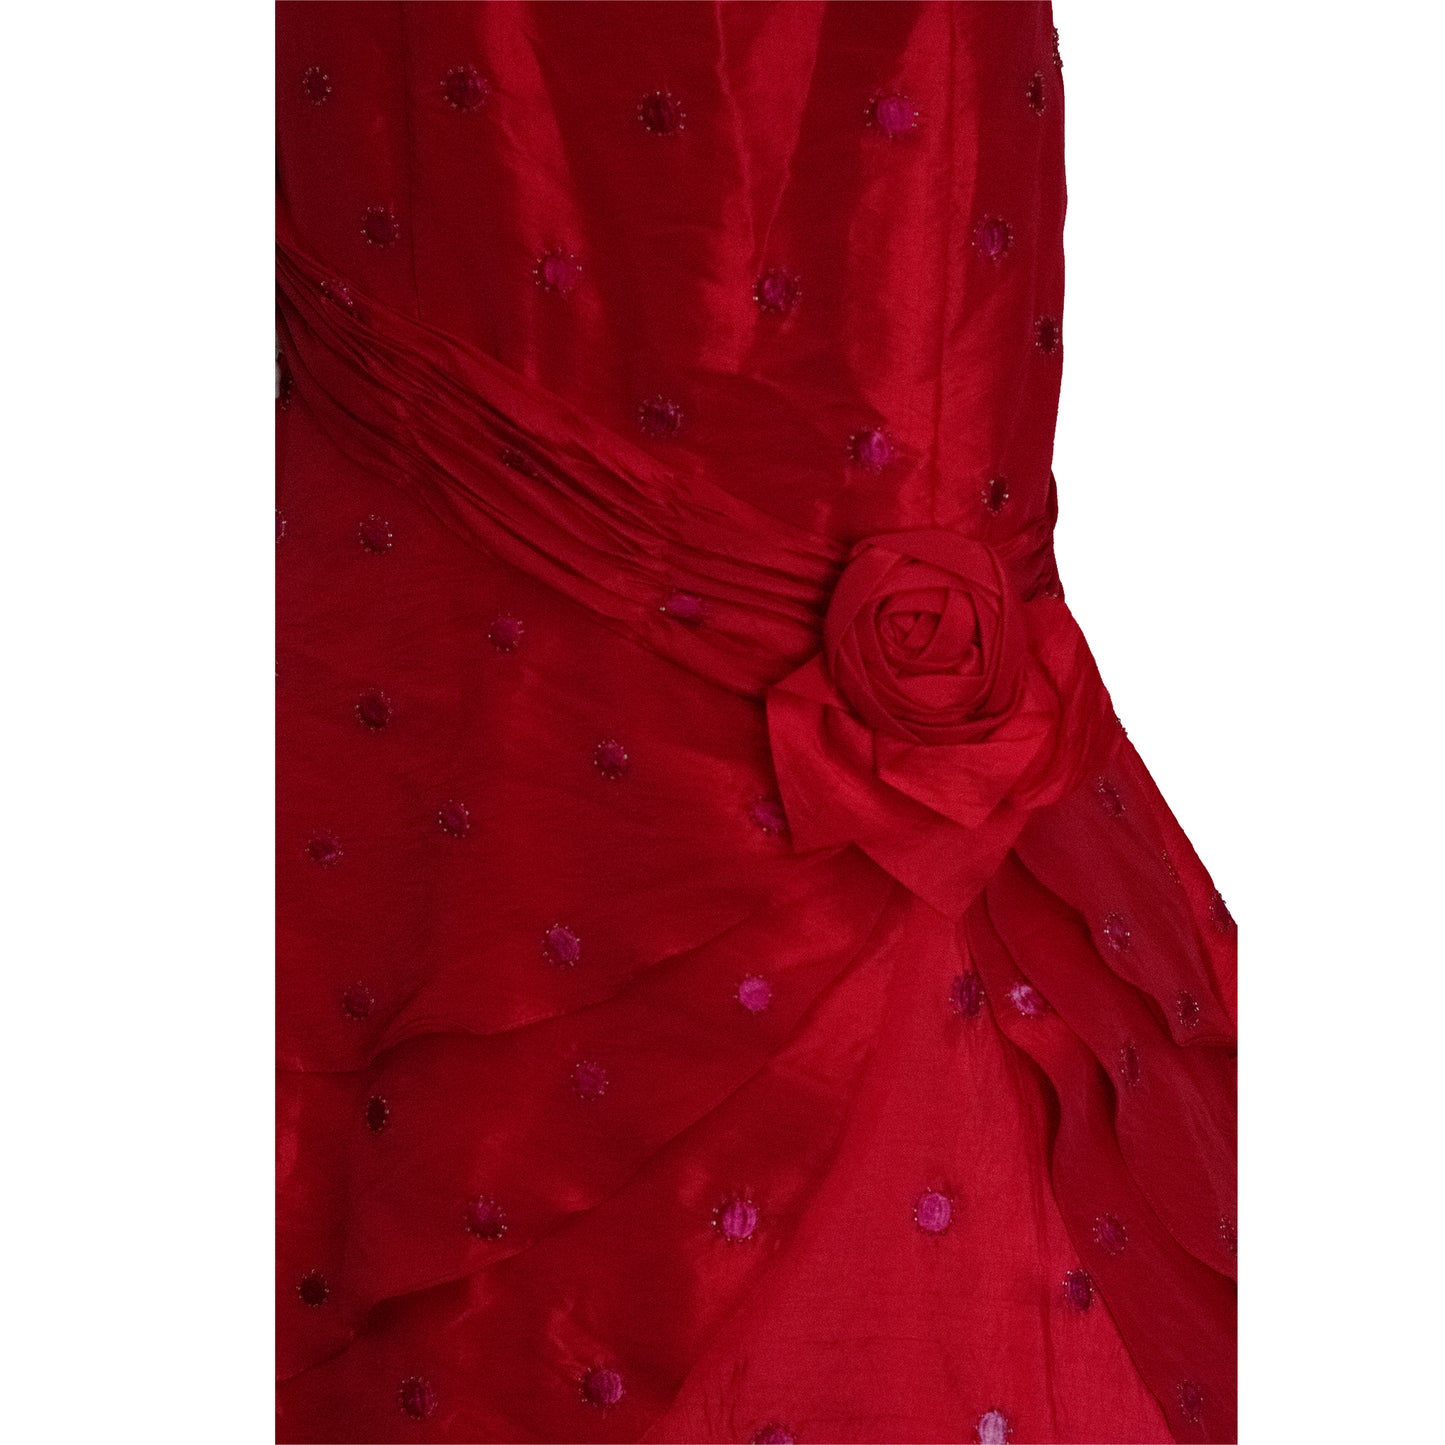 Tiffany Designs Tube-Top Ball Gown w Flower Detail Embellished Red Size 14 SKU 000356-2